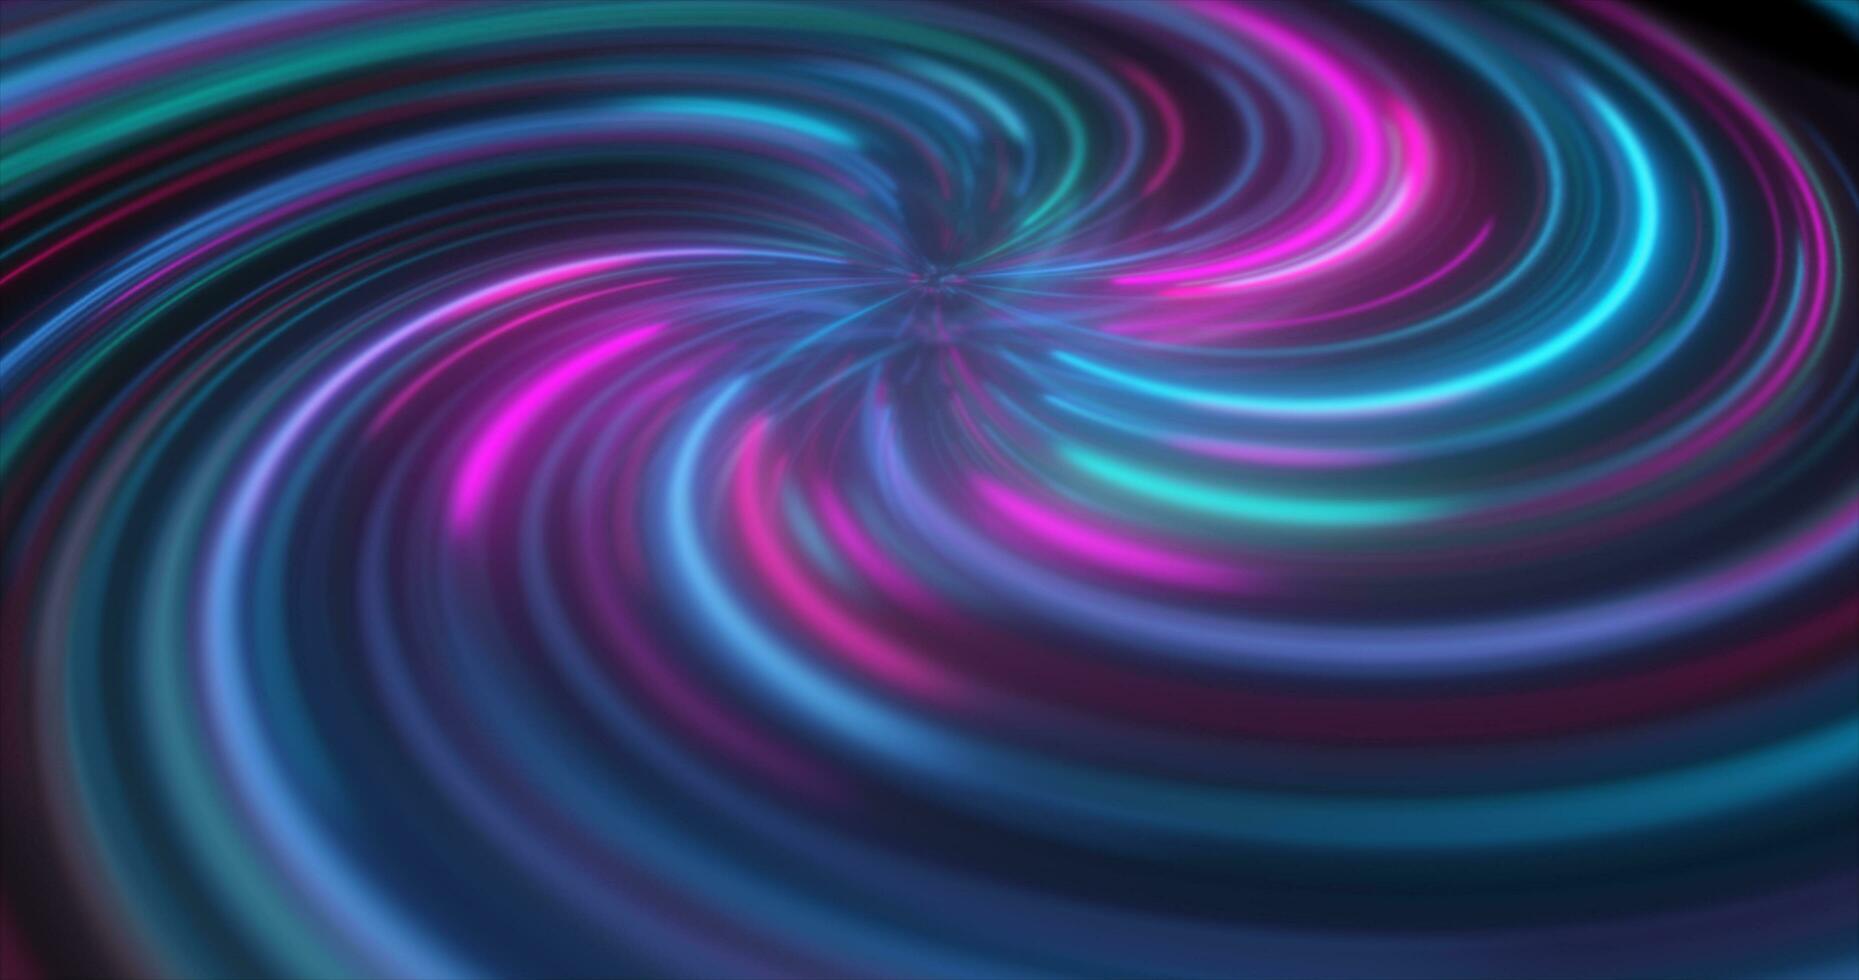 Abstract purple and blue multicolored glowing bright twisted swirling lines abstract background photo